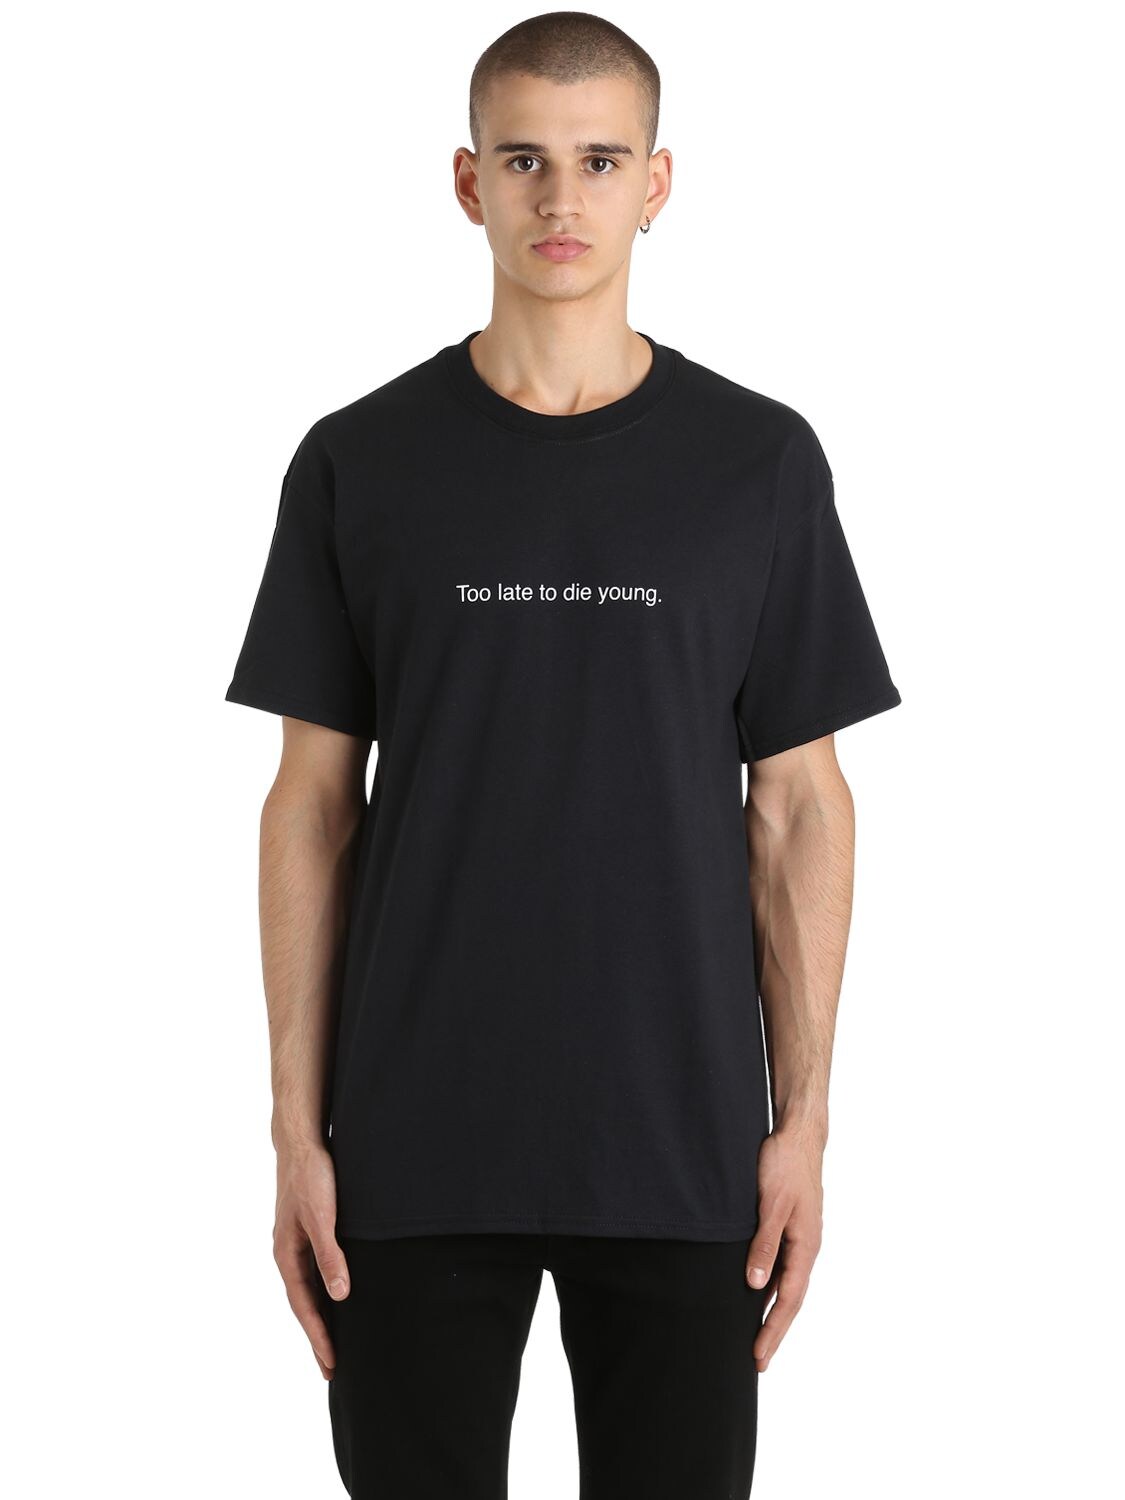 Famt - Fuck Art Make Tees Too Late To Die Young Cotton T-shirt In Black